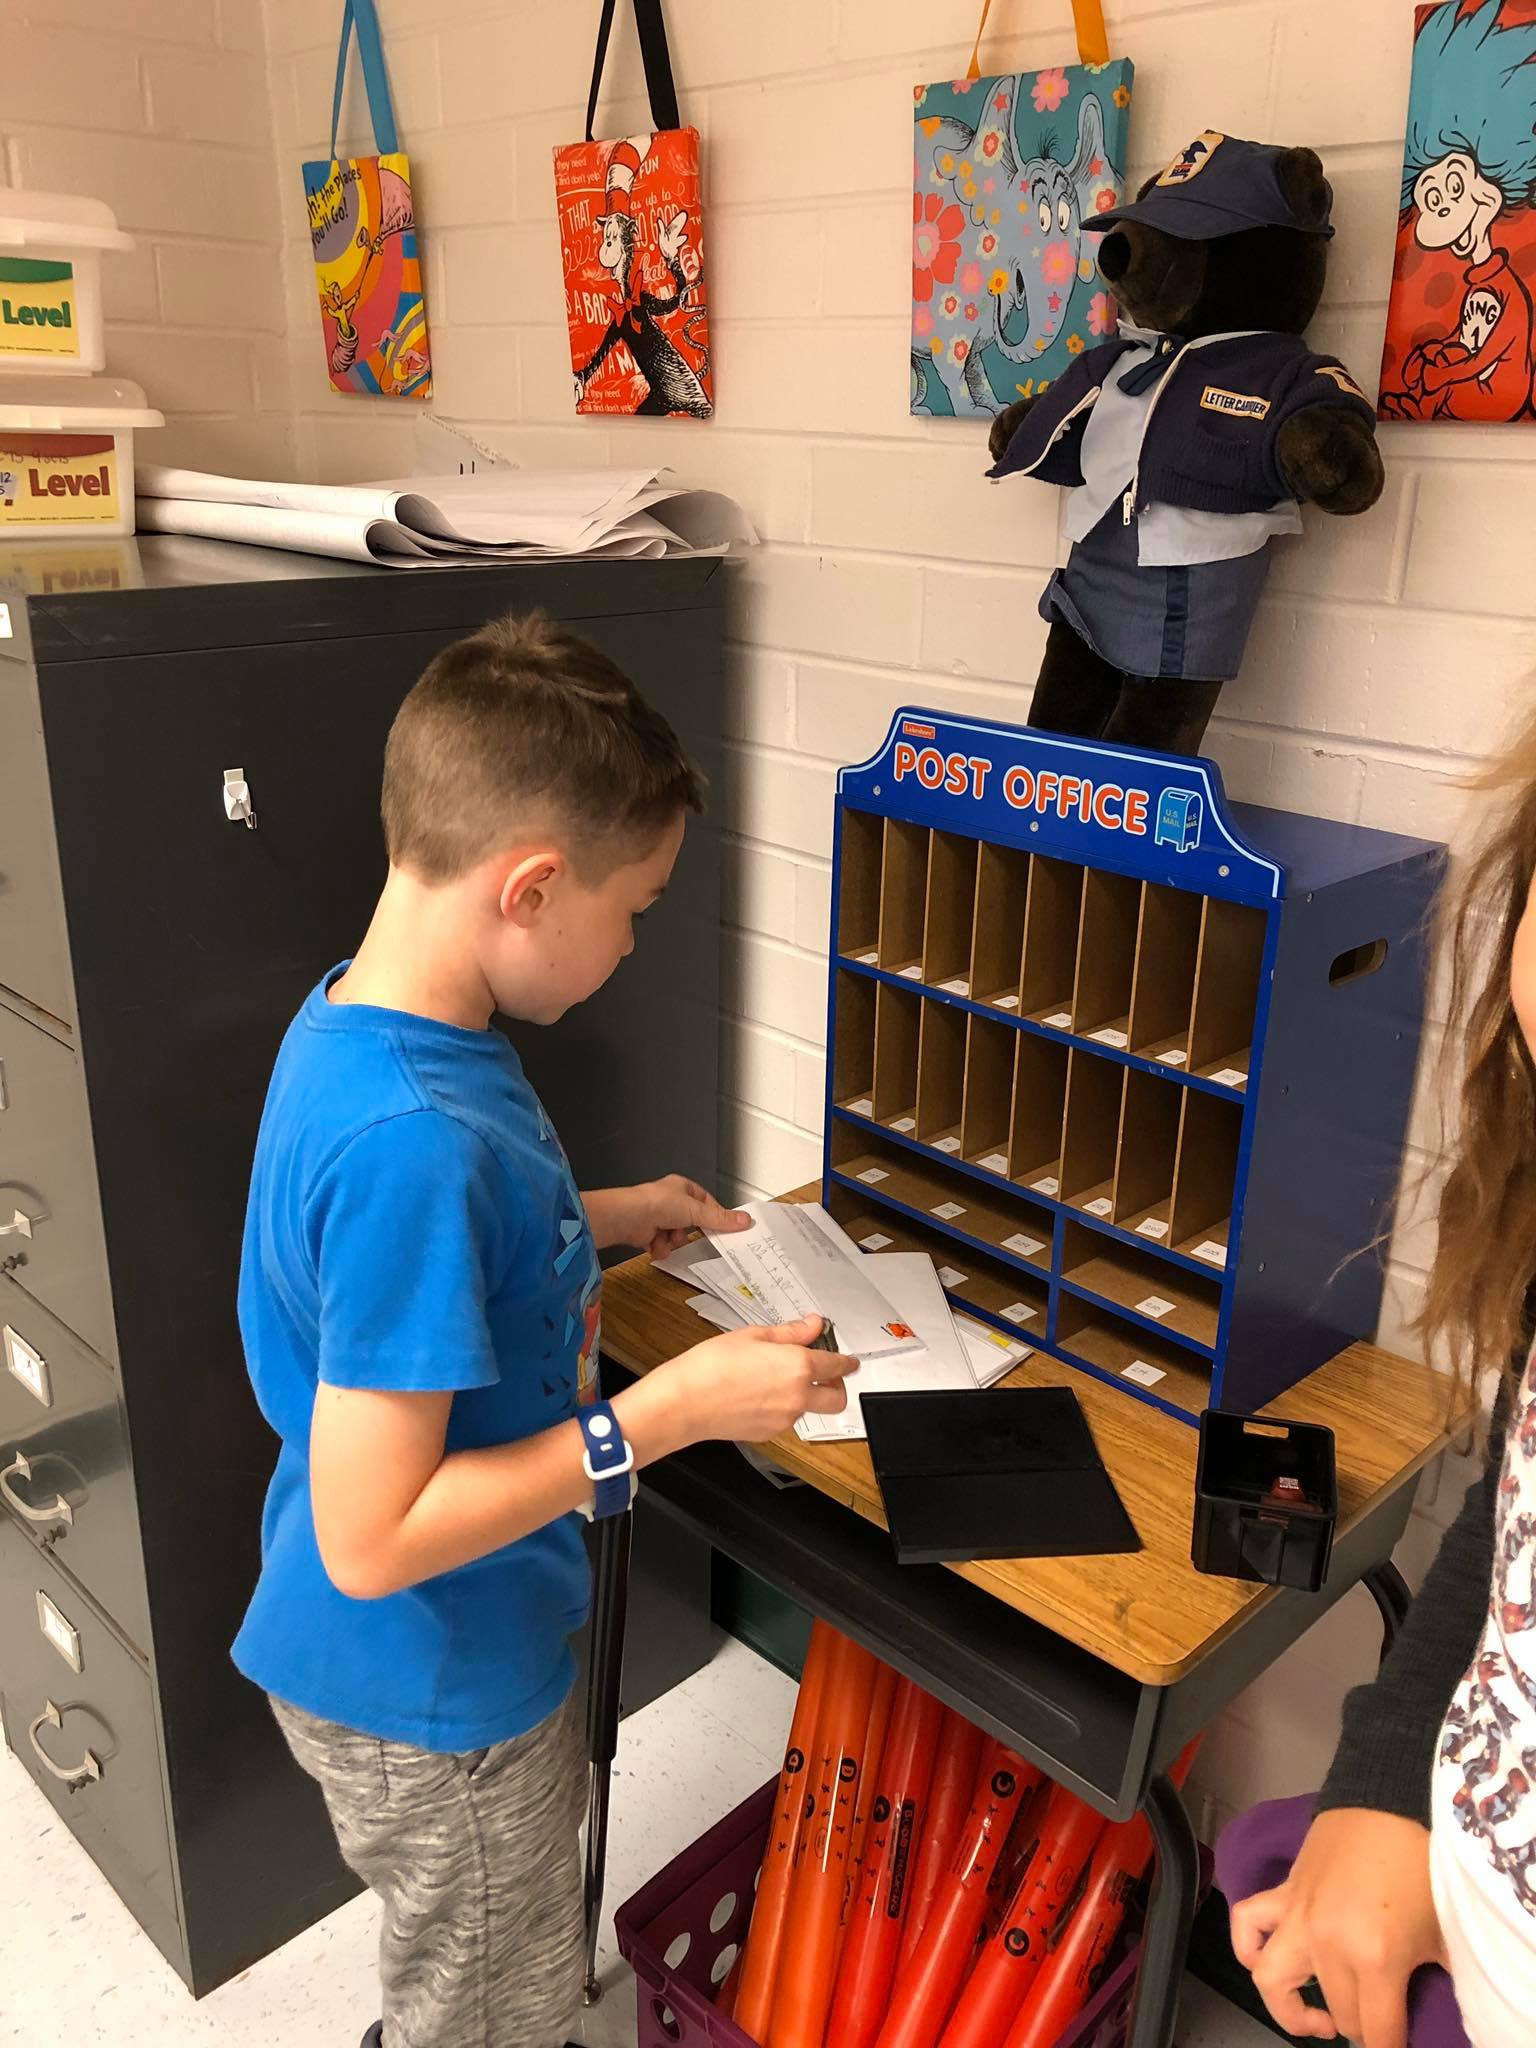 Student sorts mail at Wee Deliver Post Office